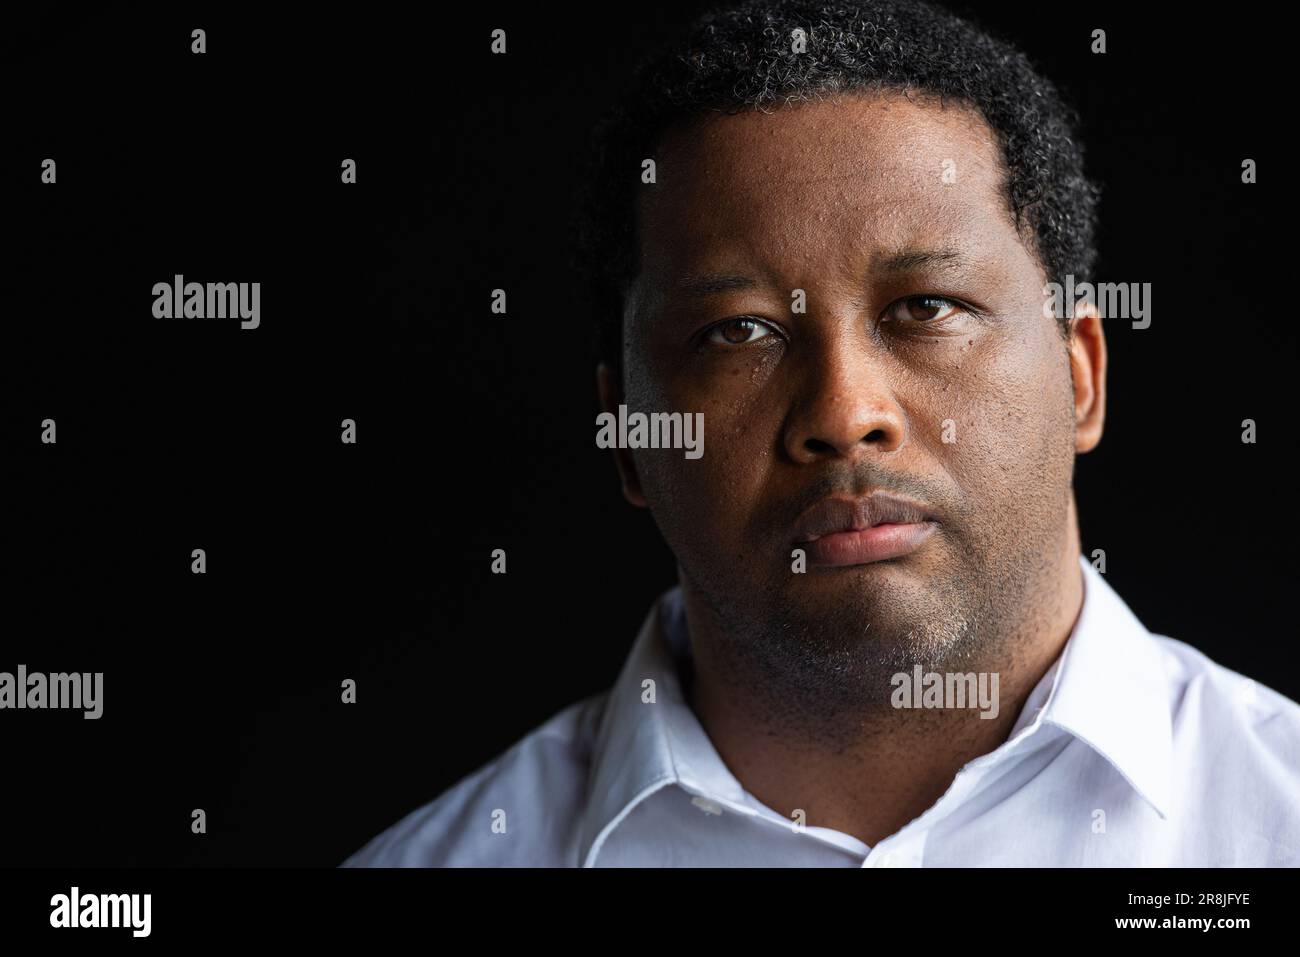 Portrait of handsome African man against black background Stock Photo